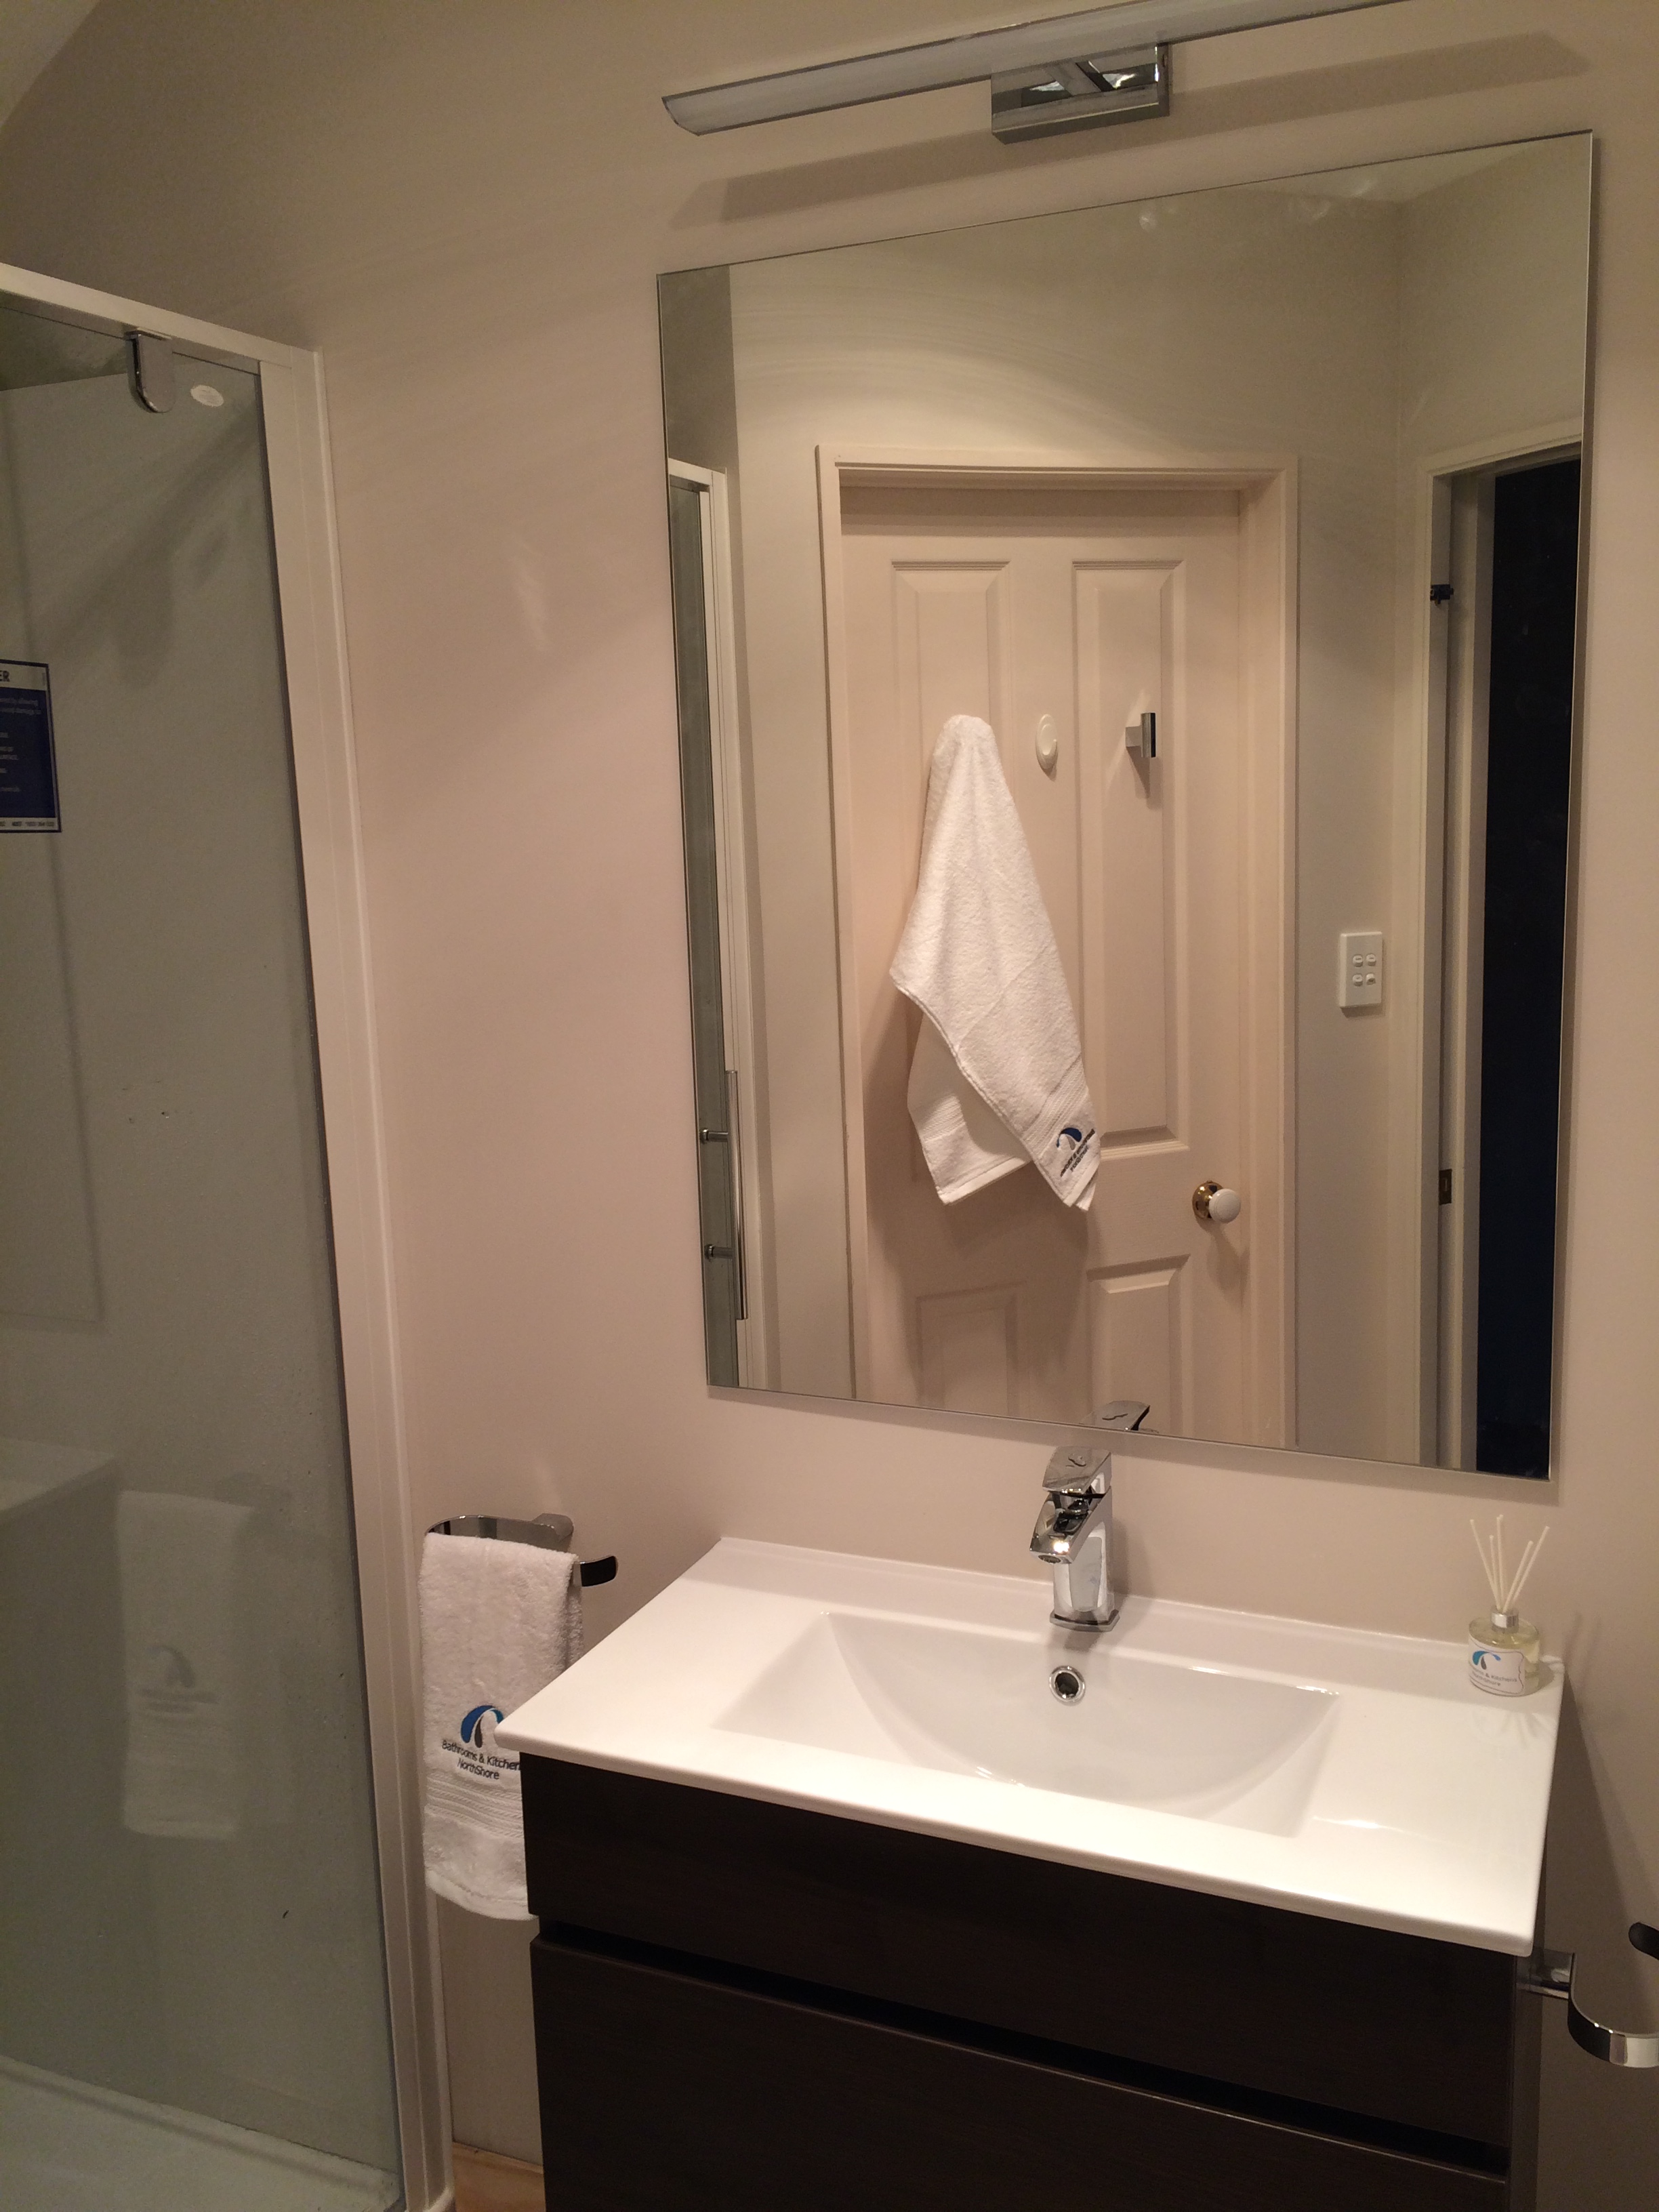 Three Bathrooms and a toilet in Forrest Hill renovation in Ravenwood Drive, Forrest Hill